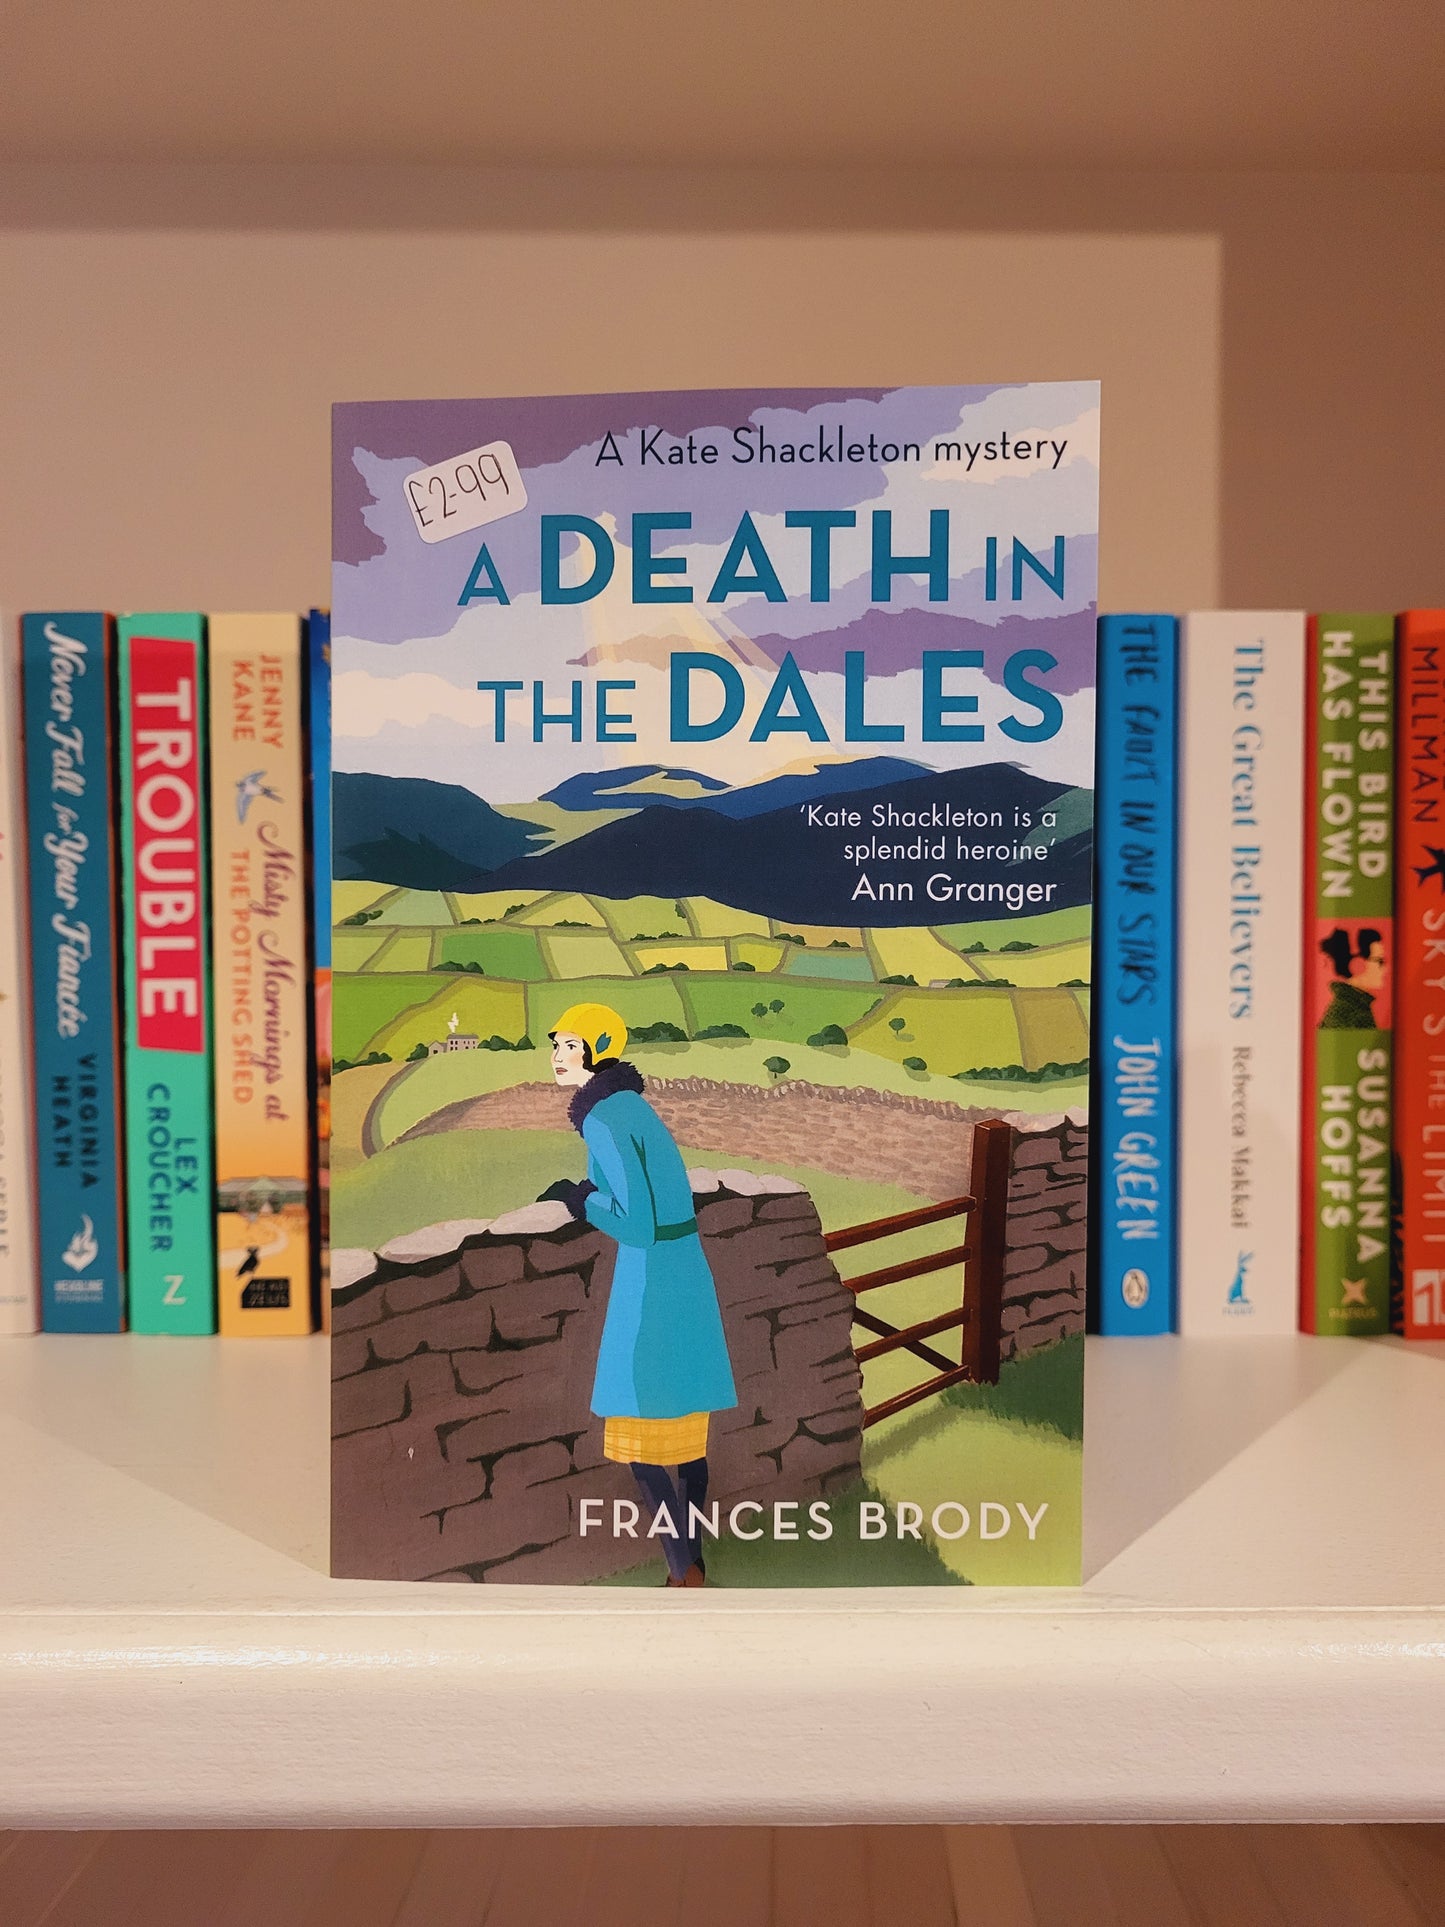 A Death in the Dales - Frances Brody